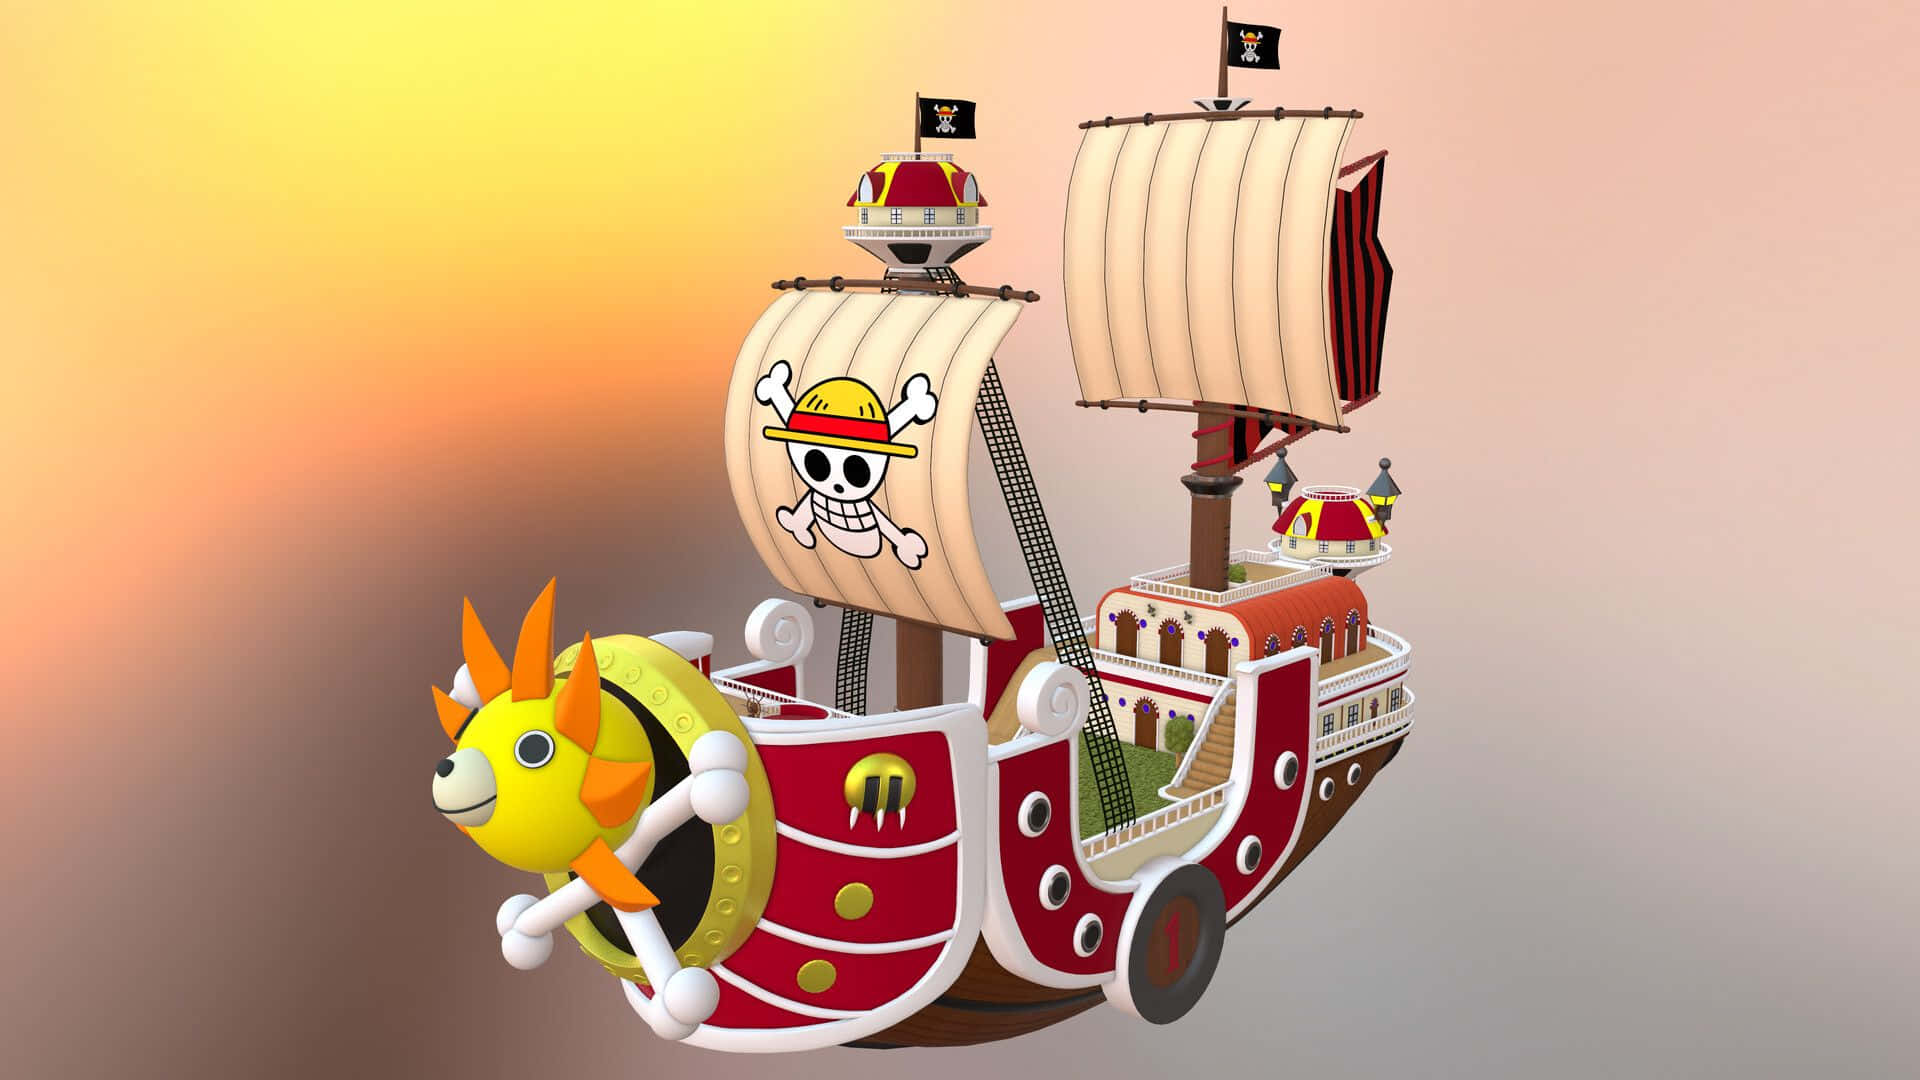 Thousand Sunny, the iconic vessel of the Straw Hat pirates Wallpaper